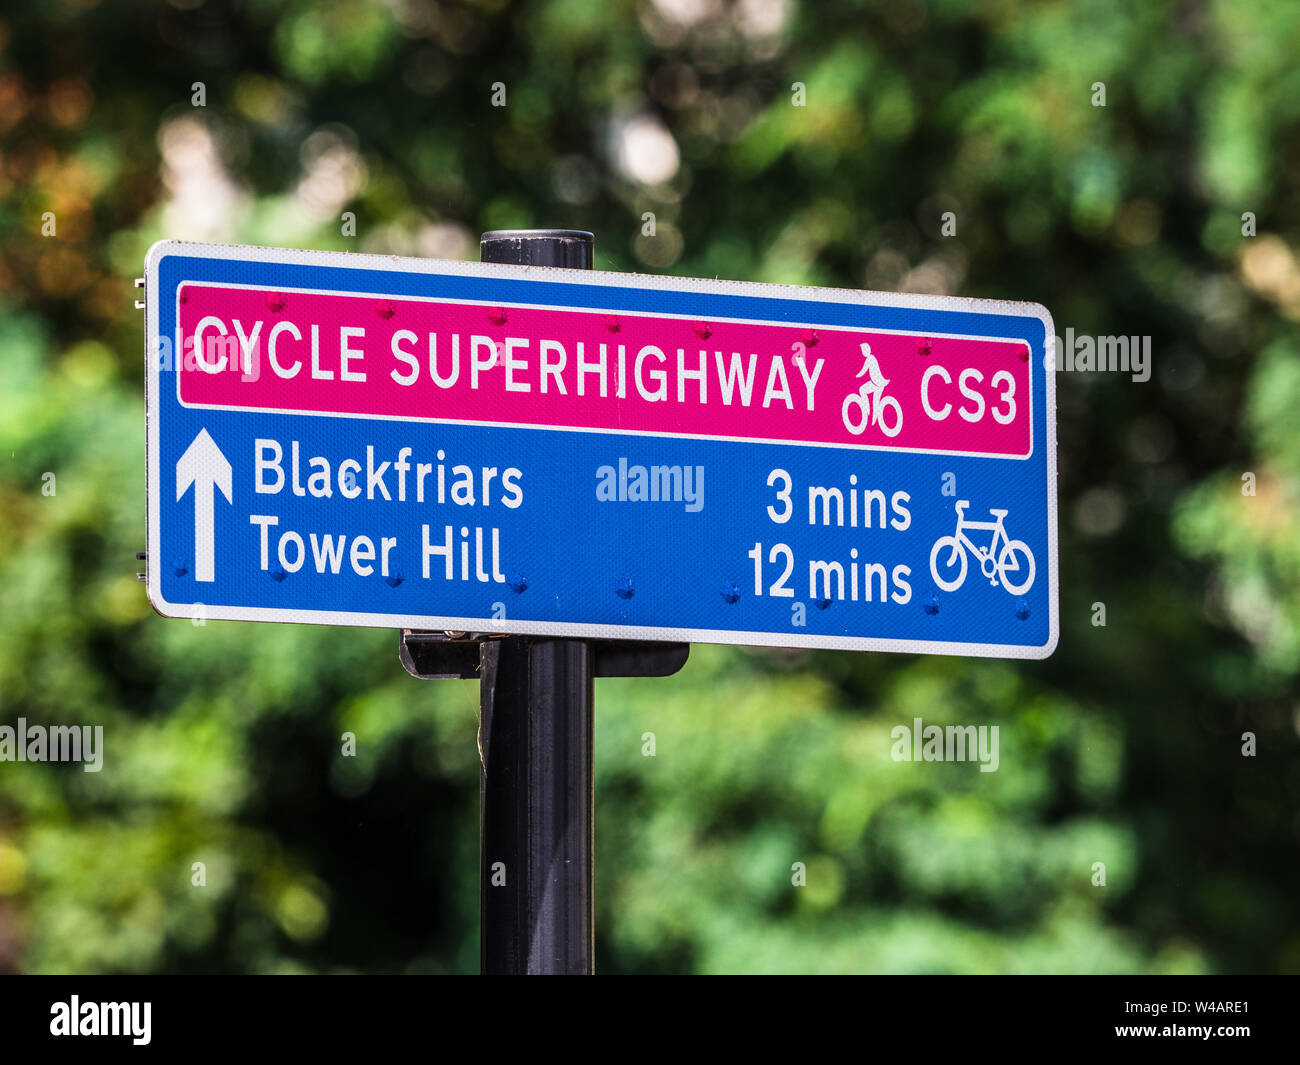 Cycle Superhighway CS3 - sign for London Cycle Superhighway C3 on the Embankment in Central London Stock Photo